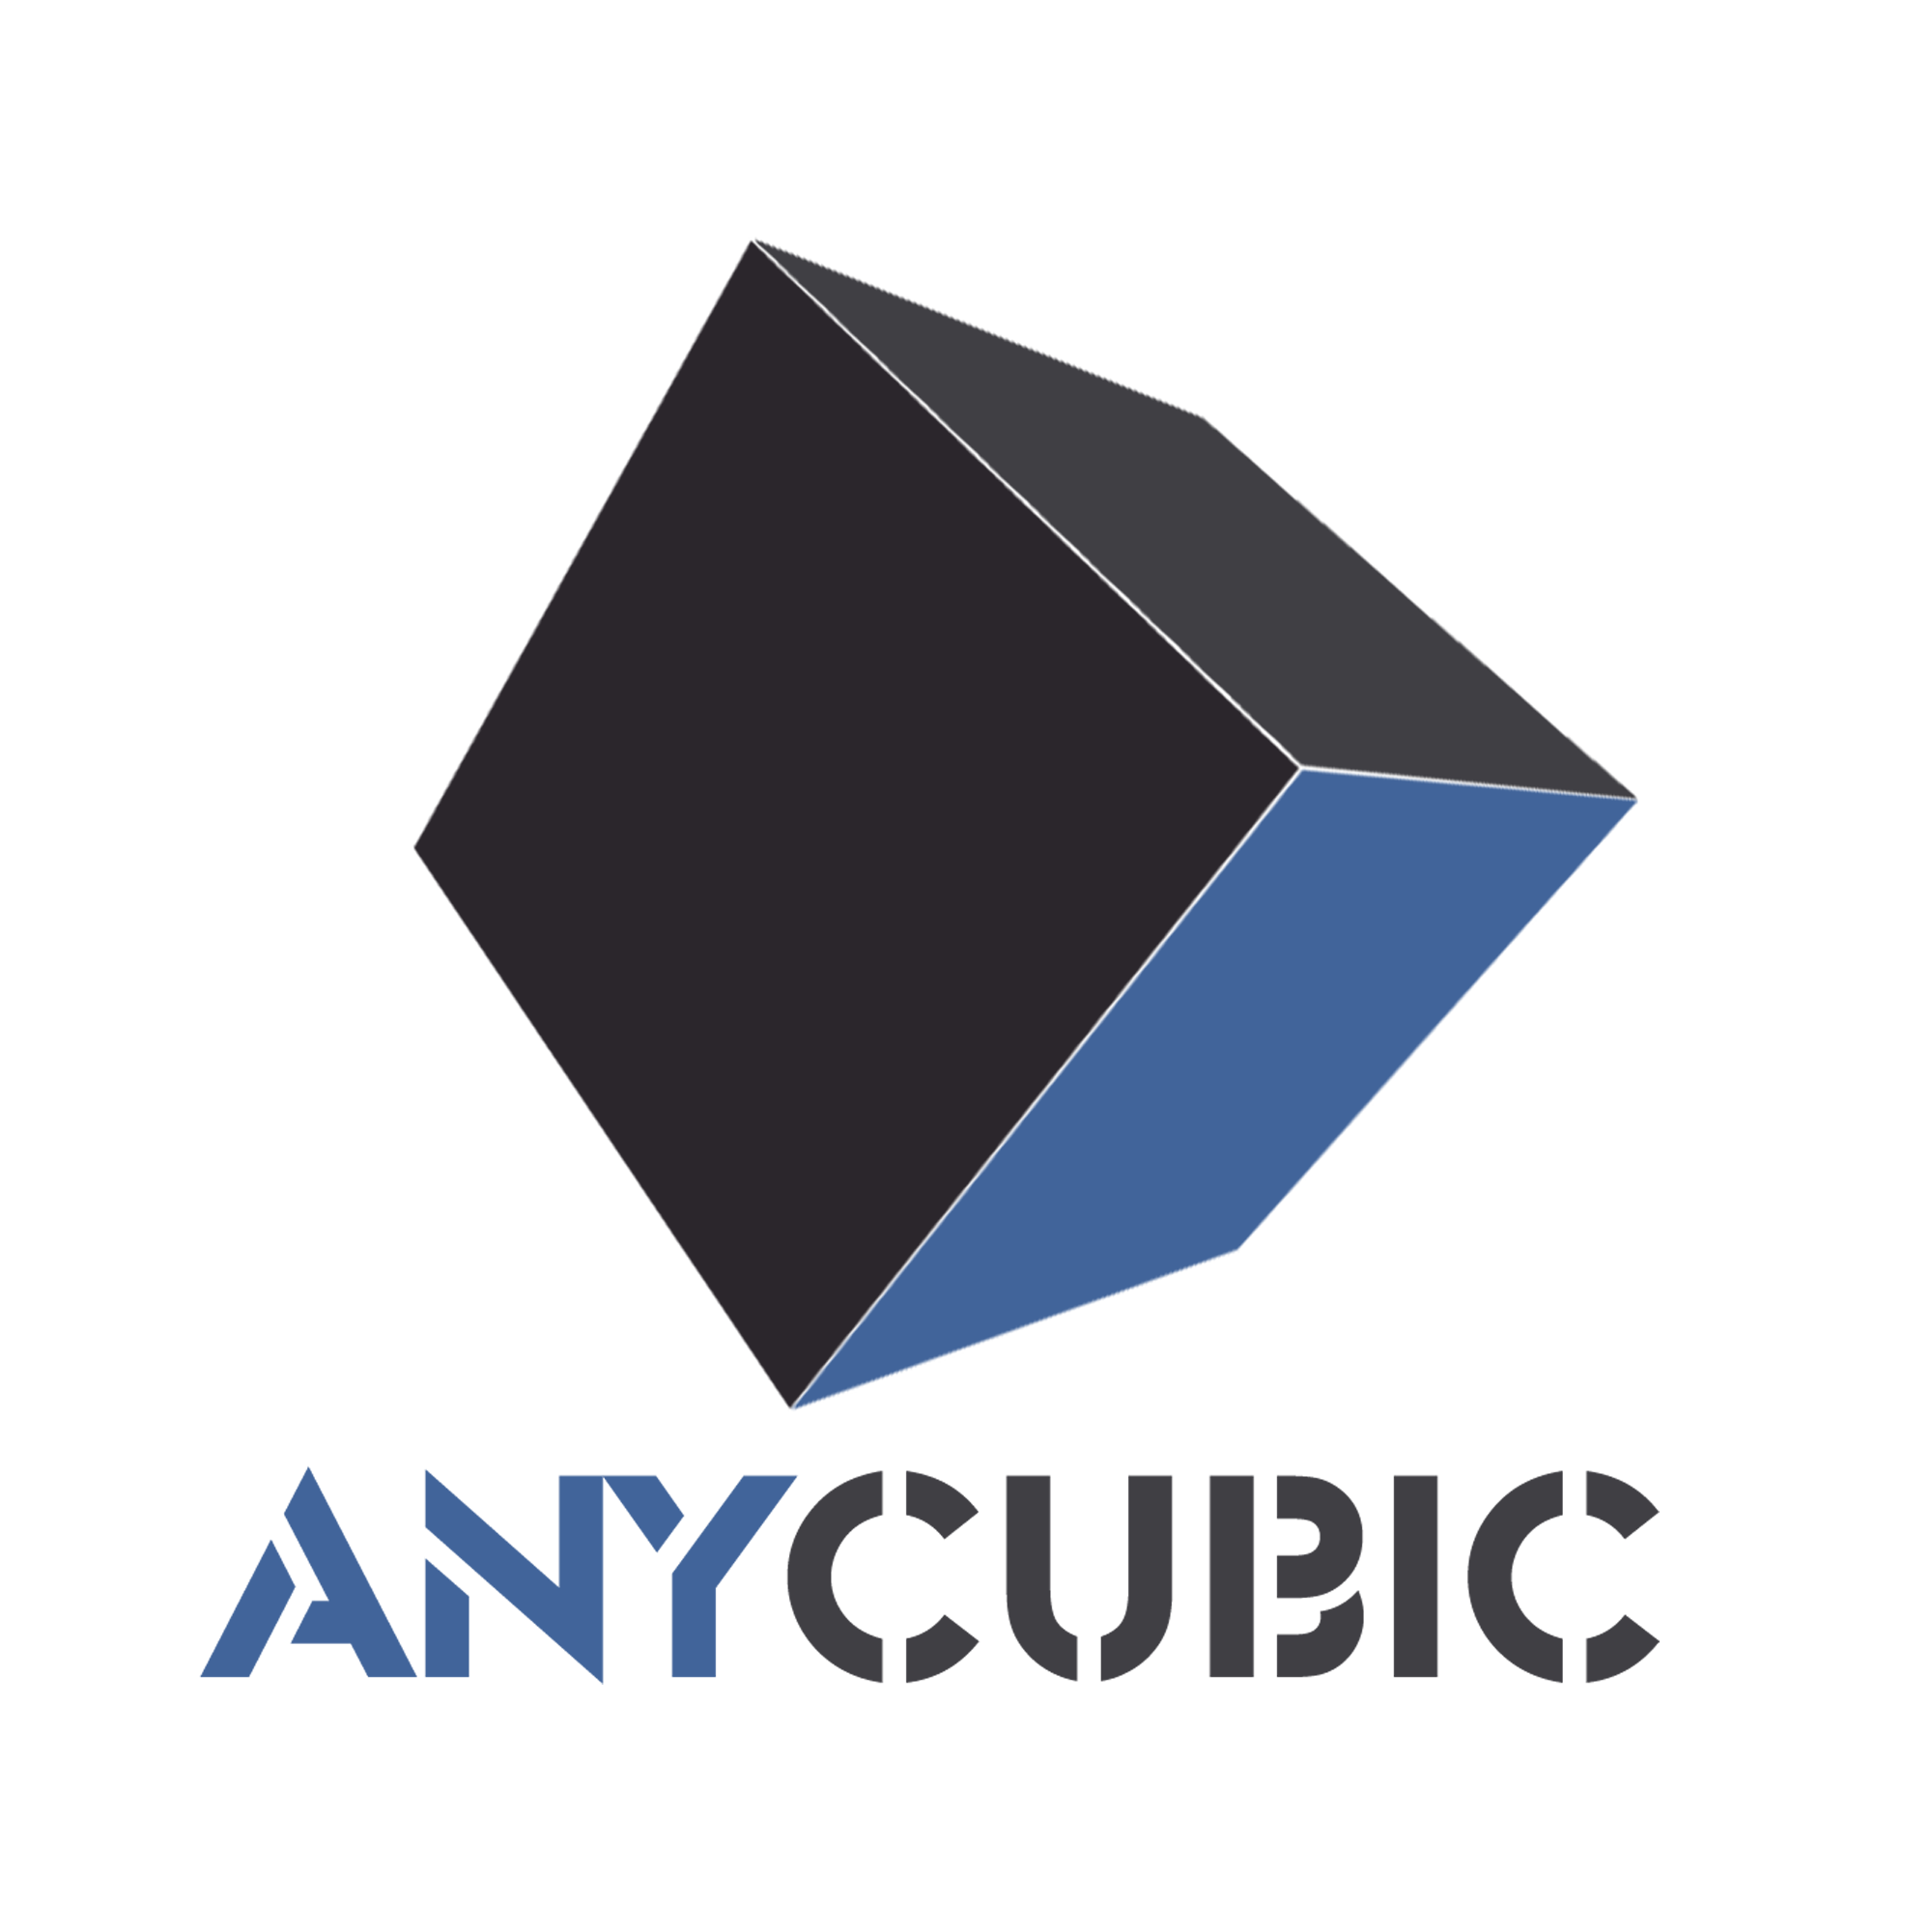 ANYCUBIC Anniversary Sale: $70 USD Discount on Photon S